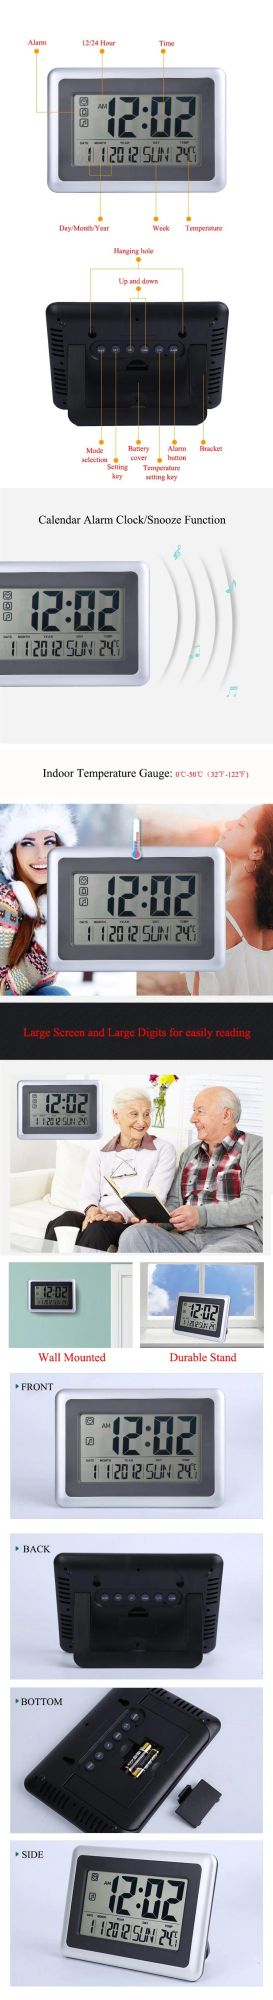 Battery Operated Desk Clock with Temperature and Date for Office Kitchen